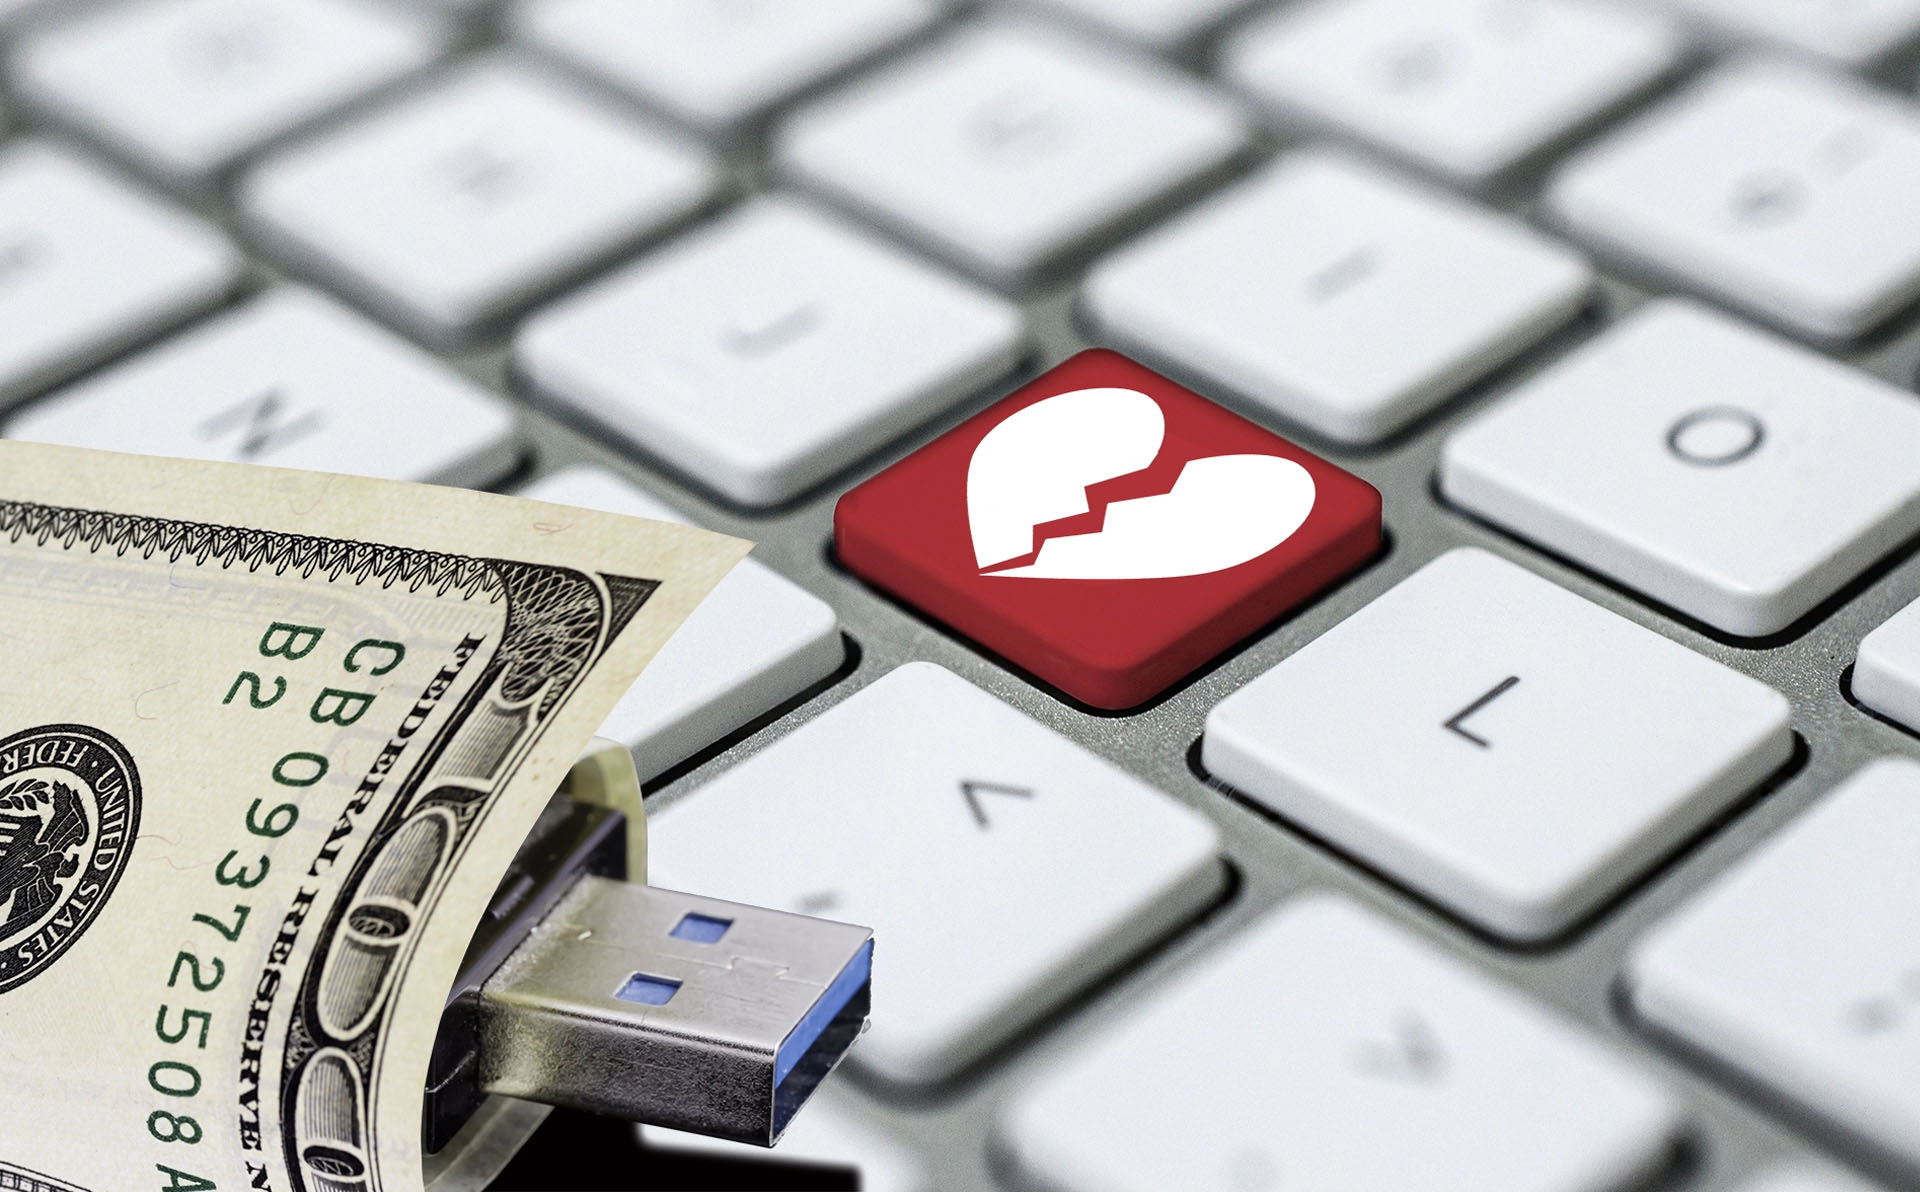 Online Romance Imposter Scams